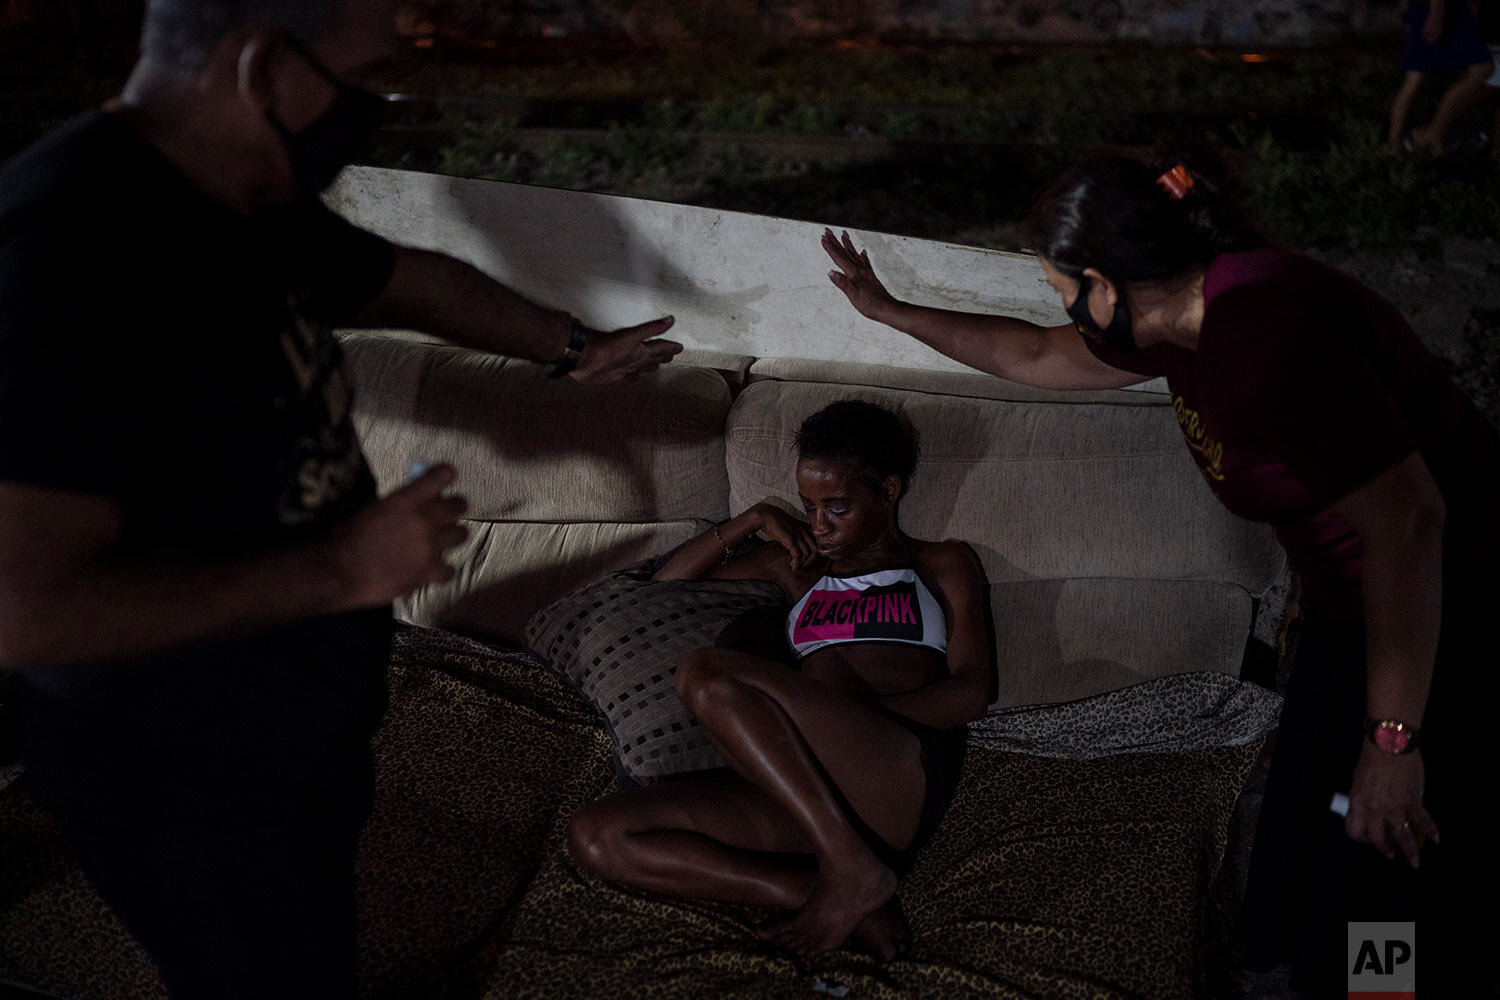  Members of the God's Love Evangelical Church and Rehab Center pray for a woman in an area known as "cracolandia" or crackland, amid the COVID-19 pandemic in Rio de Janeiro, Brazil, Friday, March 19, 2021. (AP Photo/Felipe Dana) 